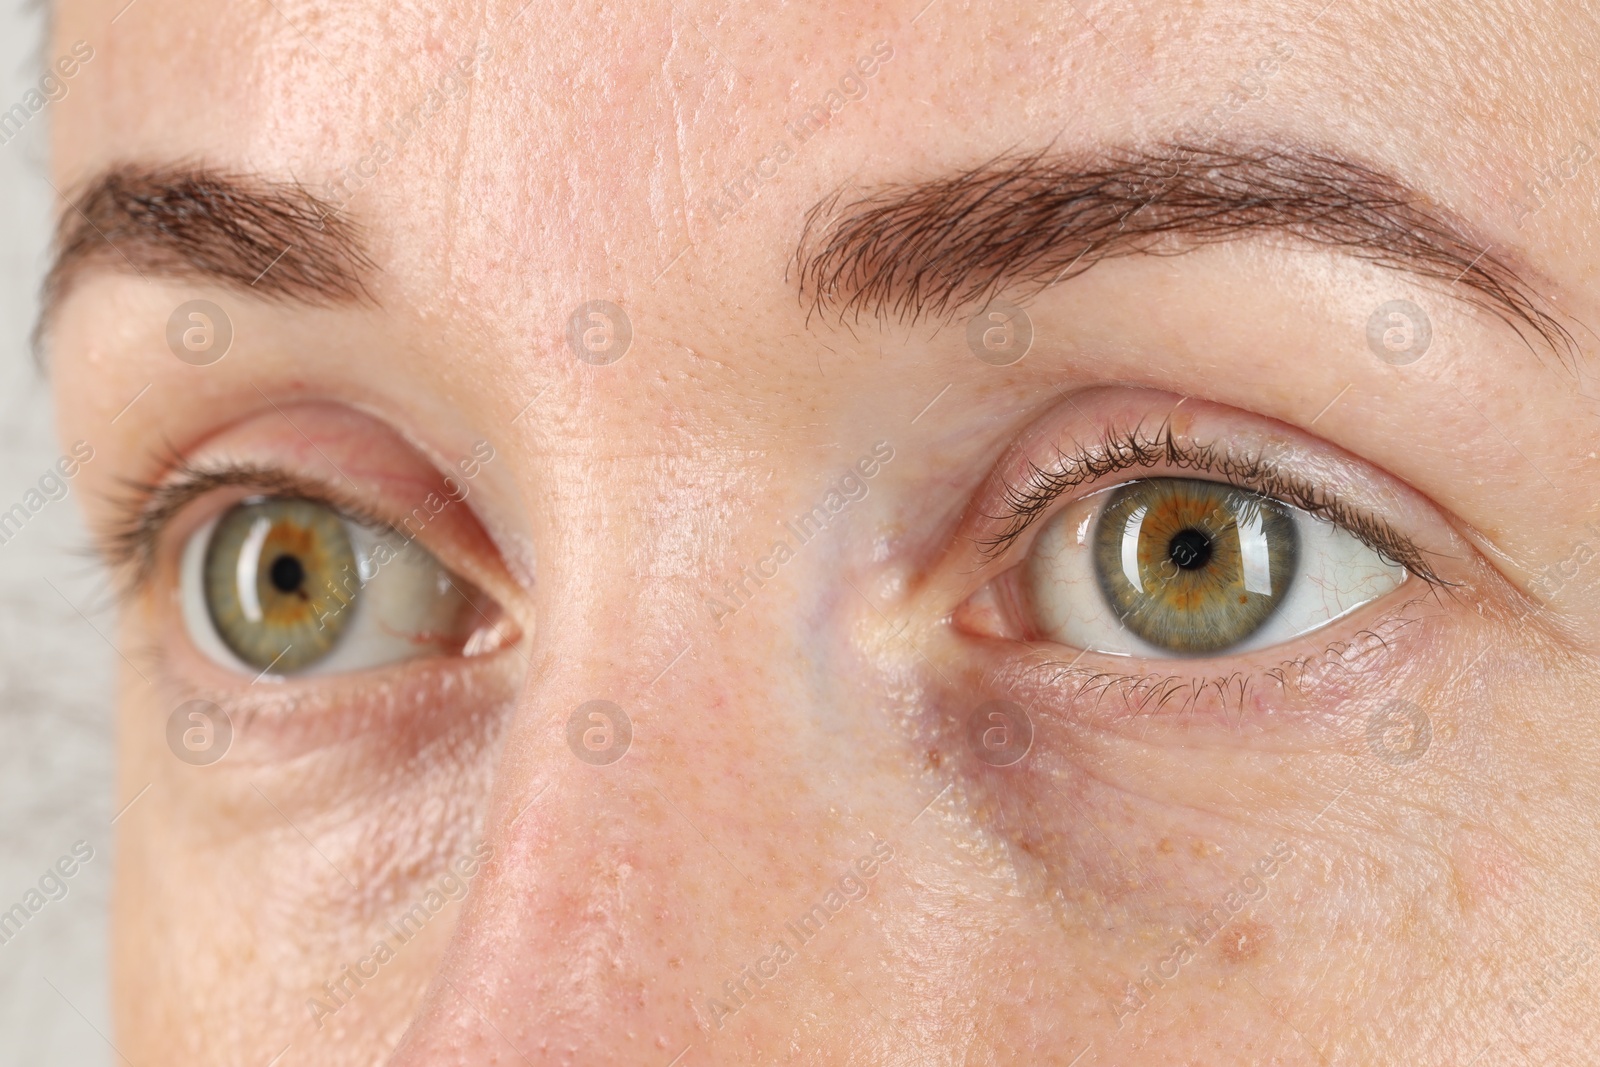 Photo of Woman with beautiful green eyes, closeup view